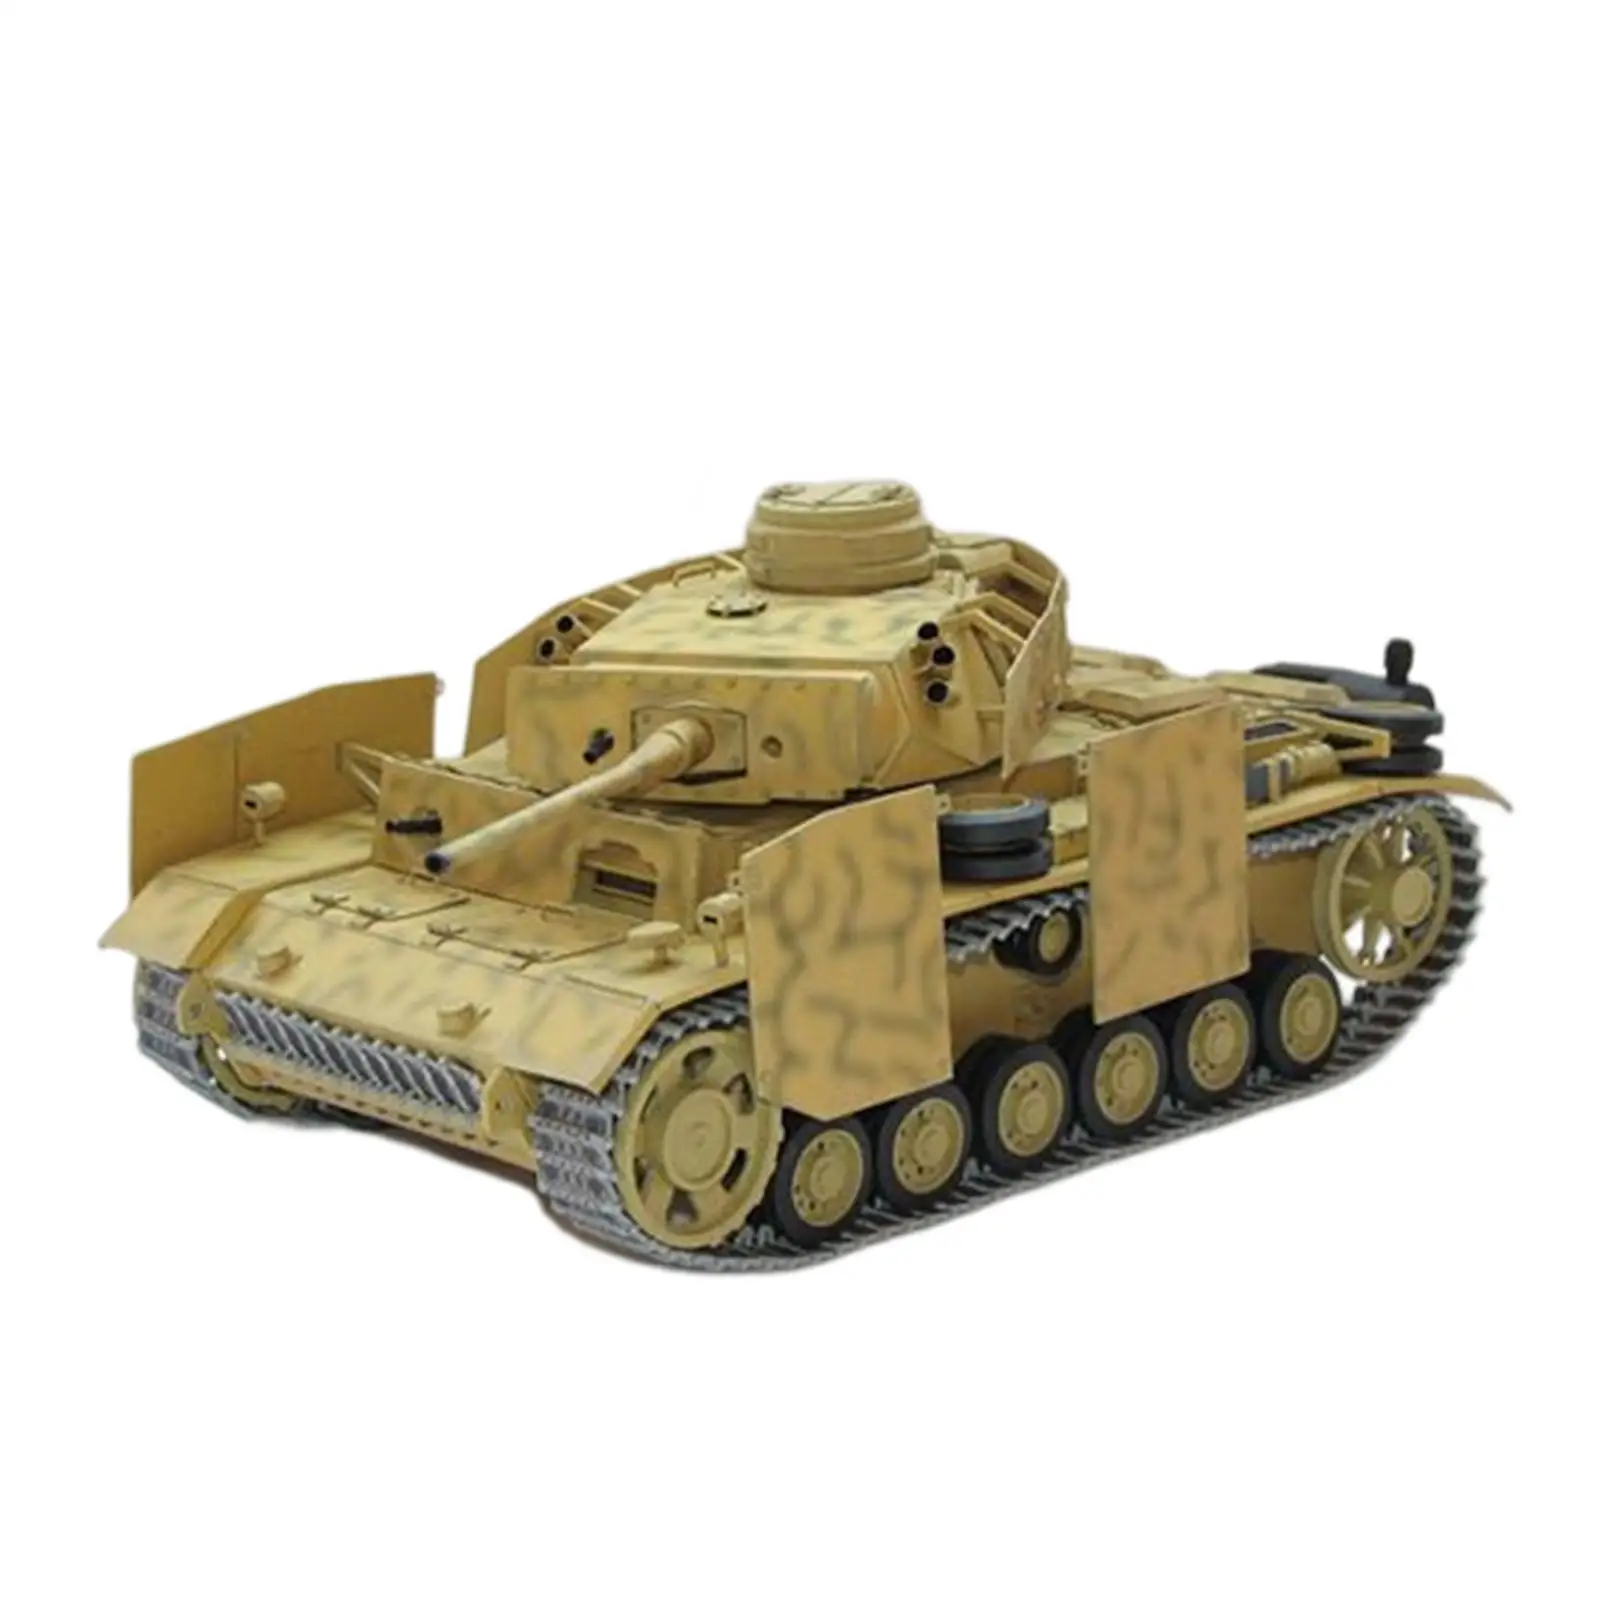 1:25 Tank Model Decorative Toy Building Collection Durable Gifts 3D Puzzle for Girls Boys Adults Kids Teenagers Beginners